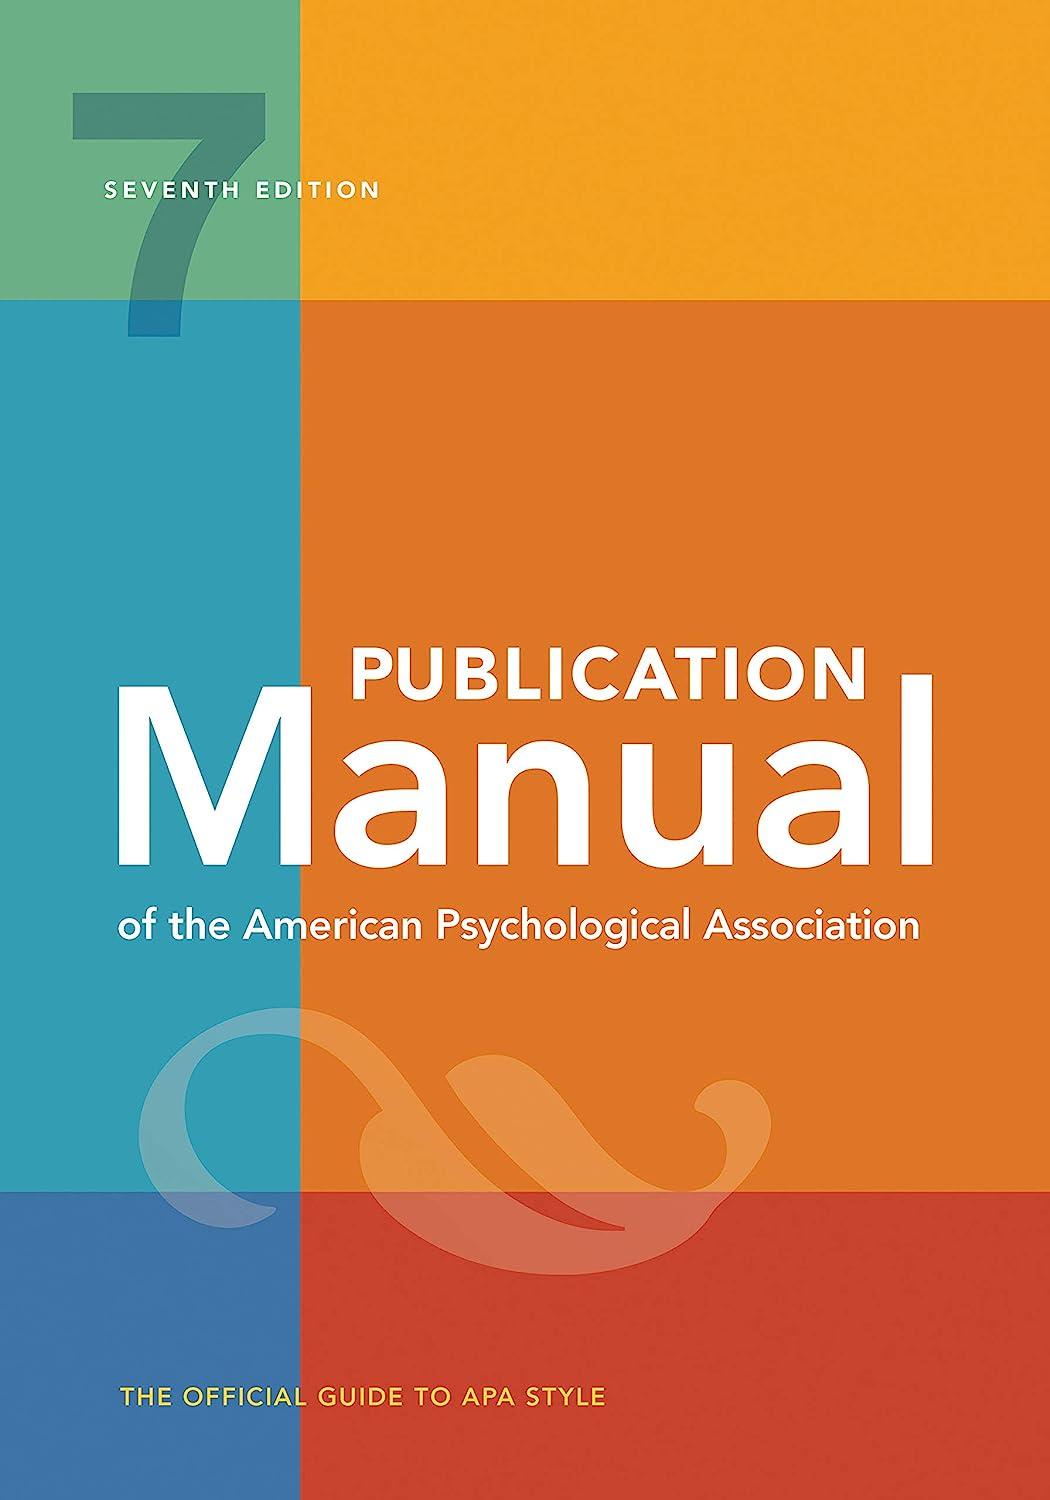 publication manual of the american psychological association 7th edition american psychological association